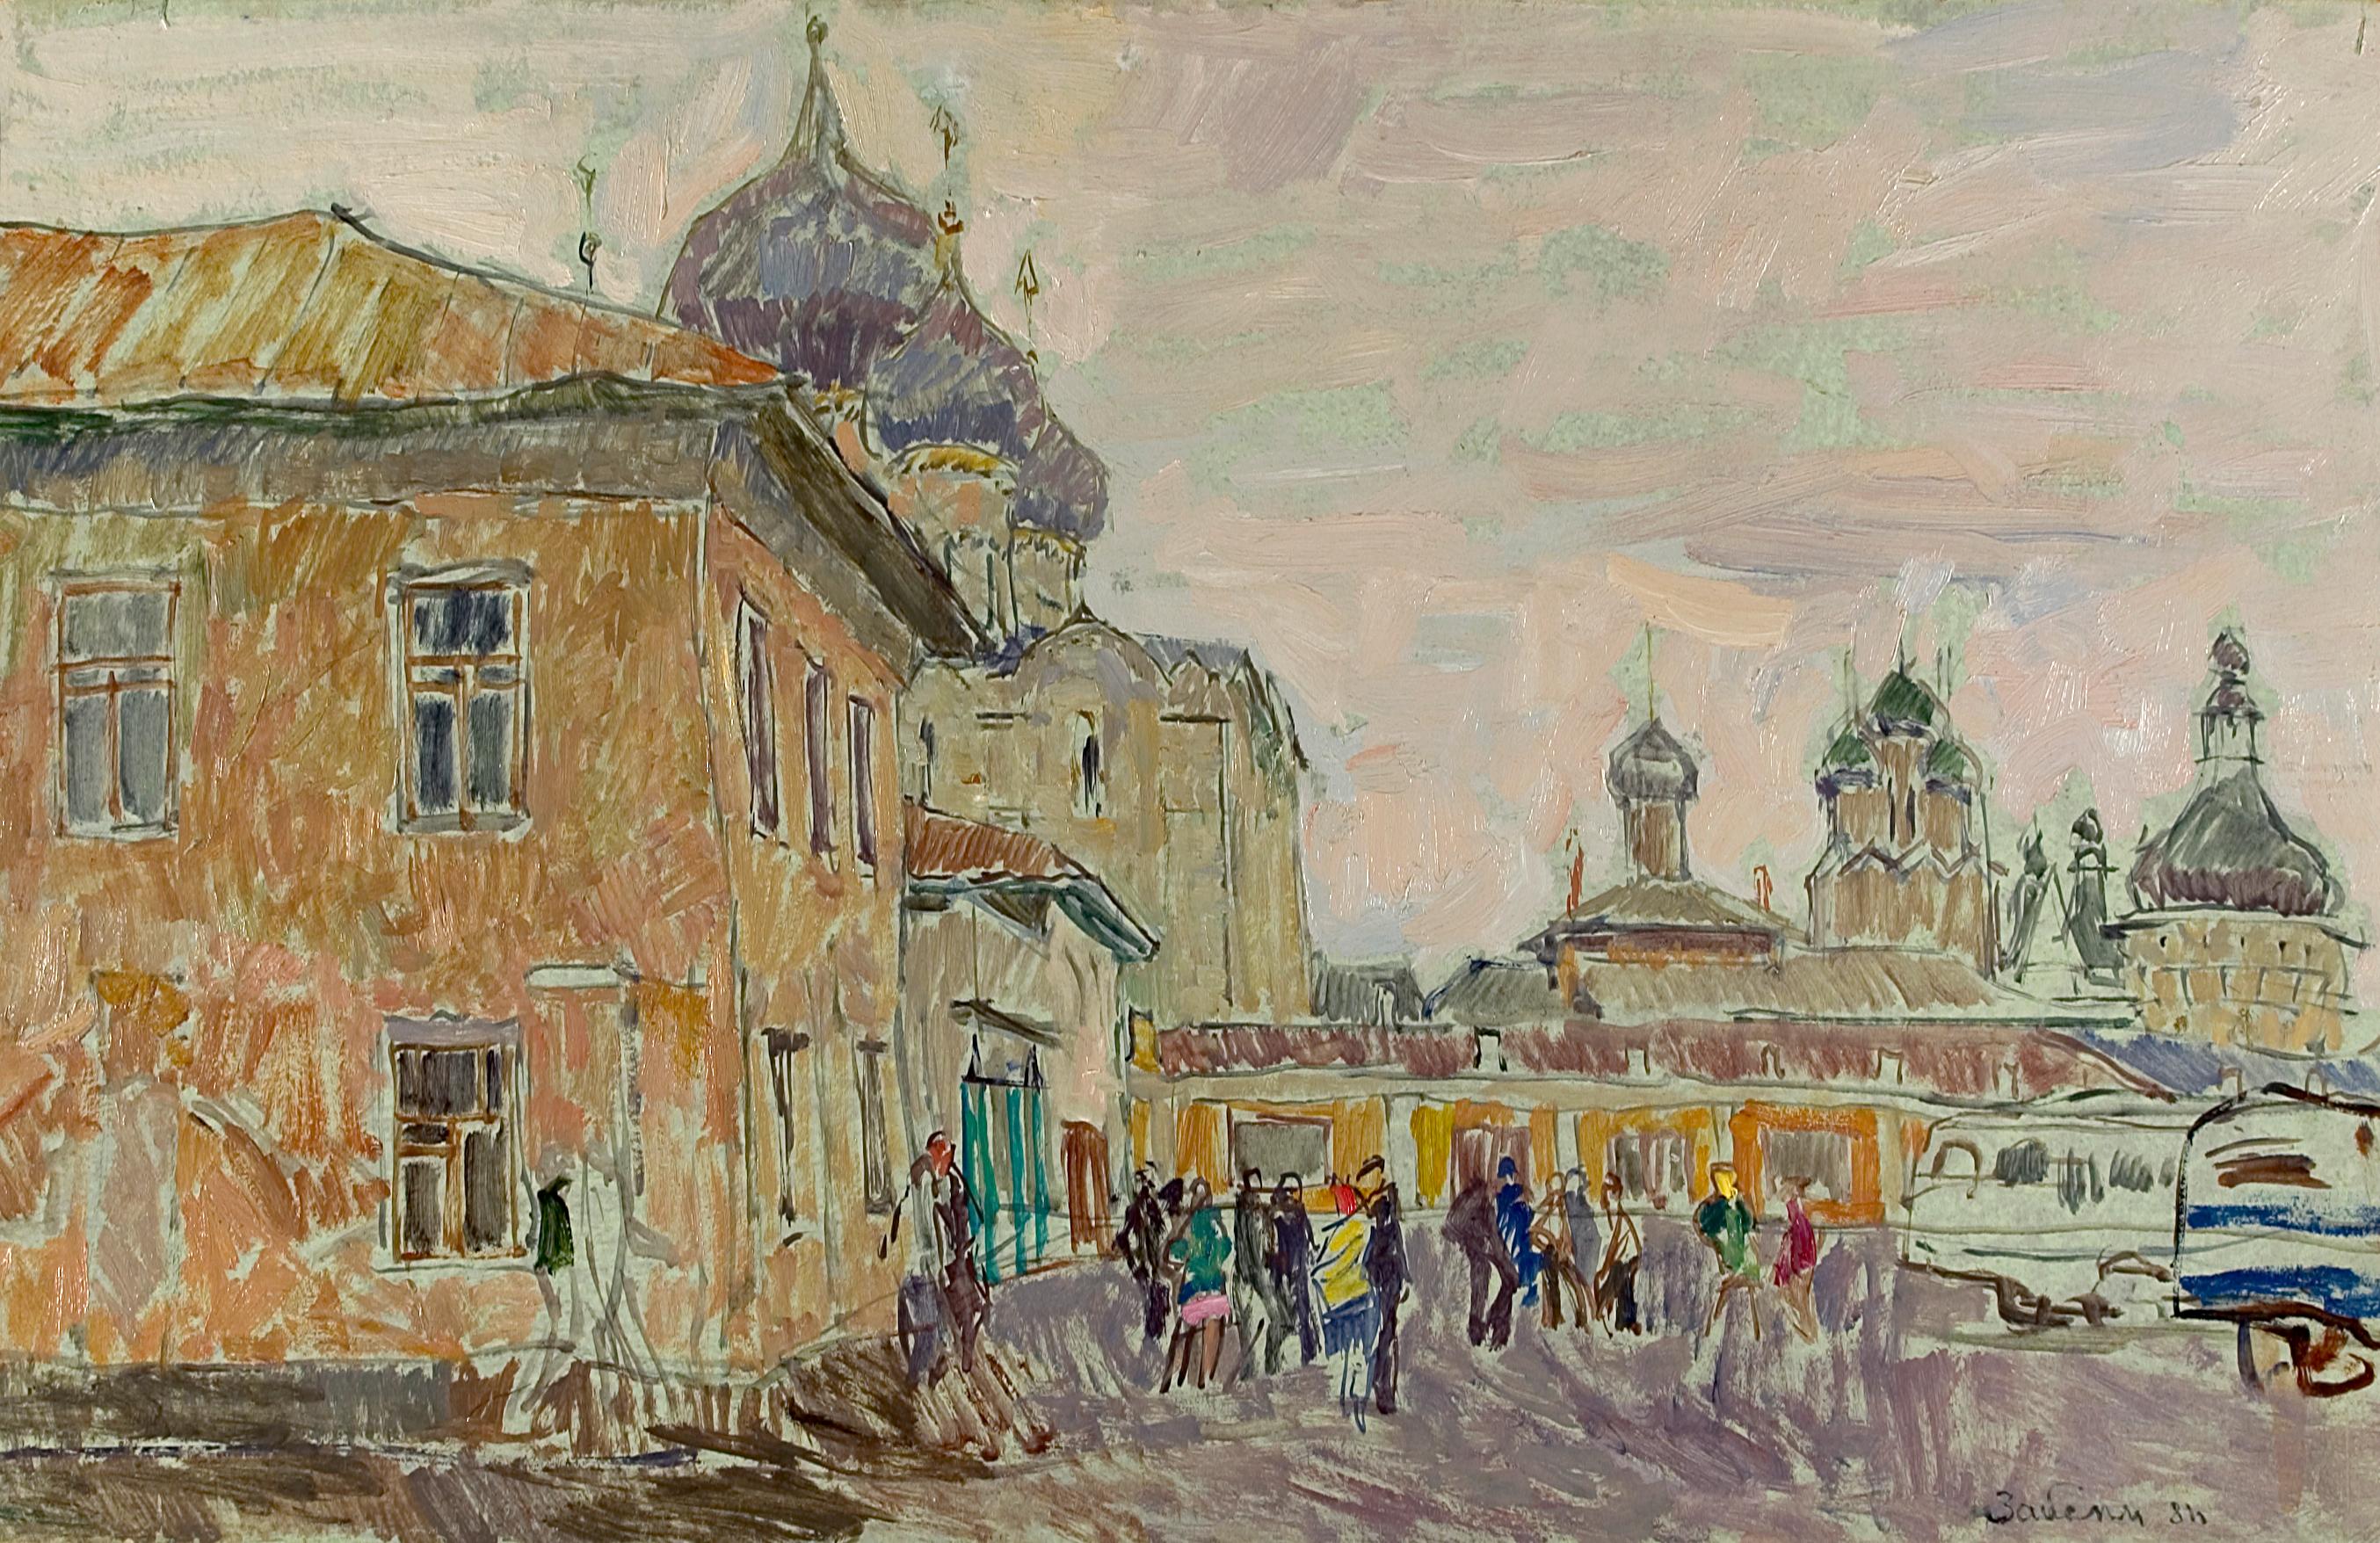 Vyacheslav Zabelin (1935- 2001) Considered a living master during his lifetime in Moscow, painted Pearl Colored day in 1984. Zabelin had already 300 paintings in museum collections throughout the world at the time of his death. A Surikov professor